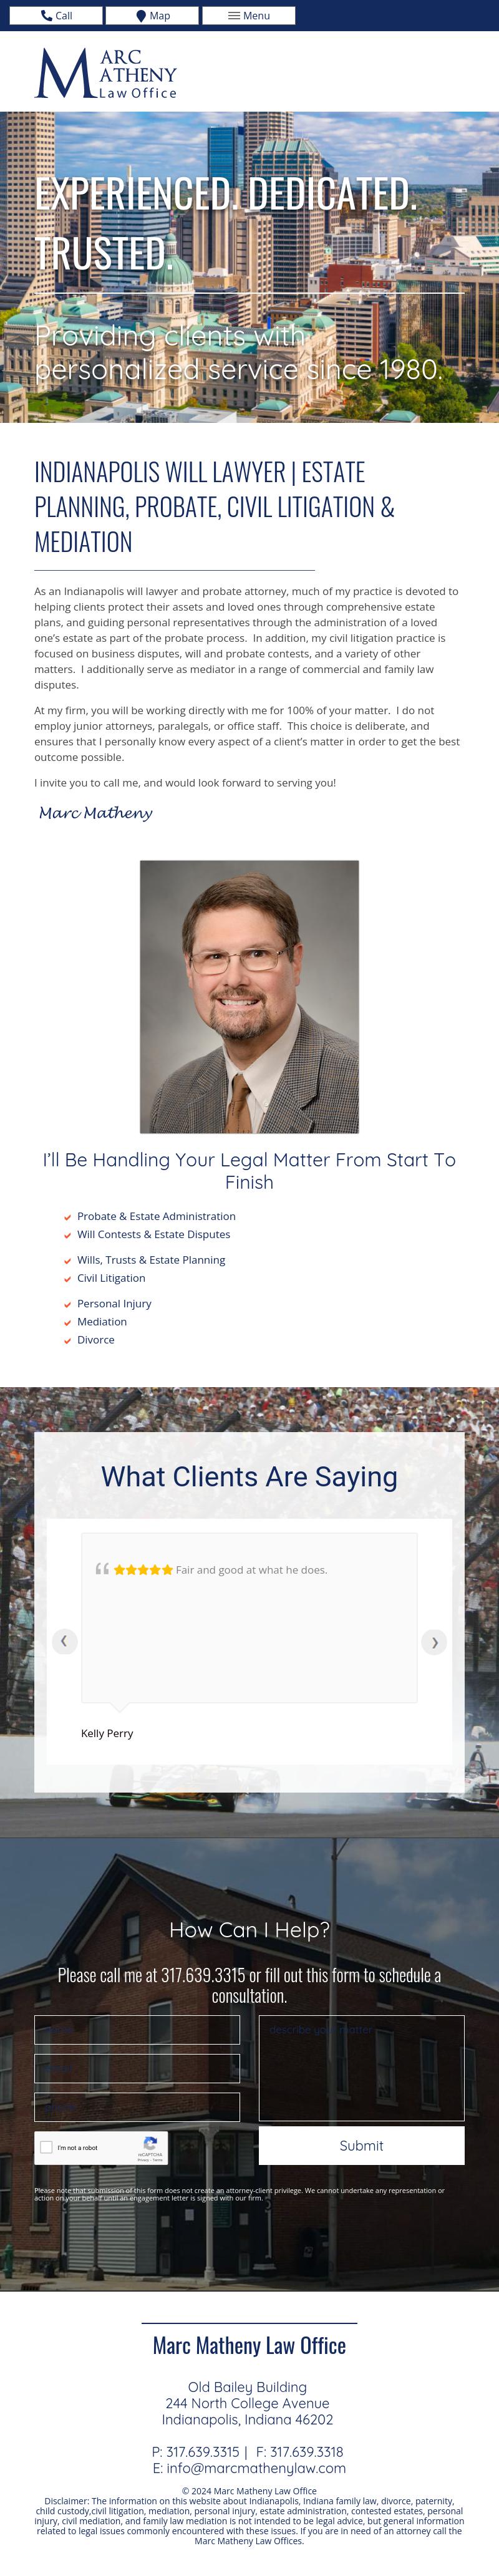 Marc Matheny Law Offices - Indianapolis IN Lawyers